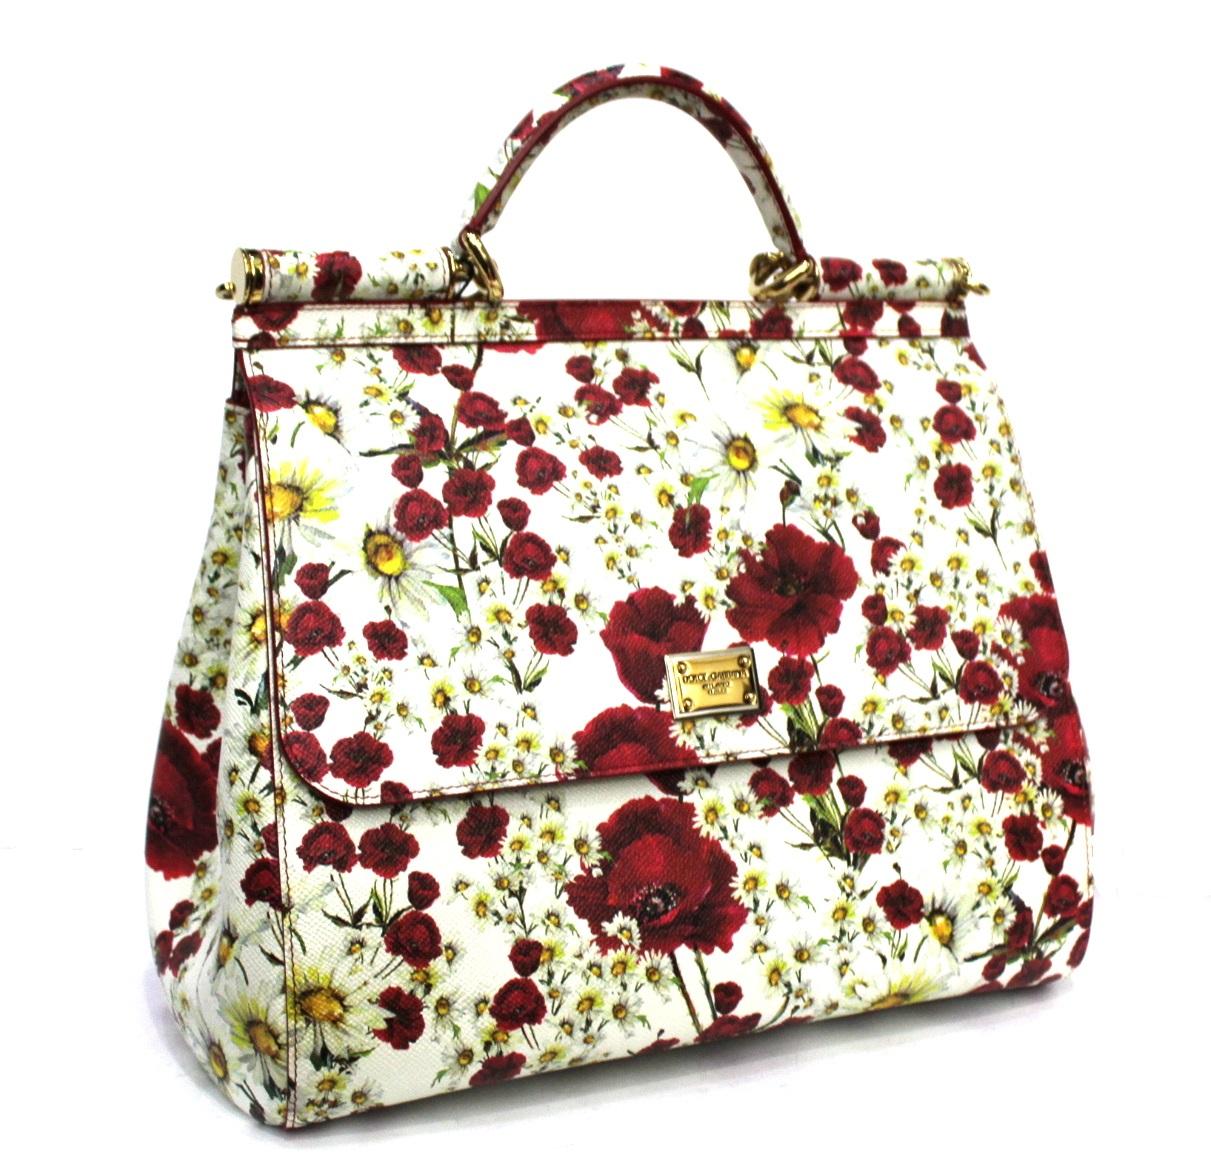 D&G Sicily model bag made of white flowery leather.

Equipped with handle and shoulder strap. Comfortable and capacious.

Very good condition.